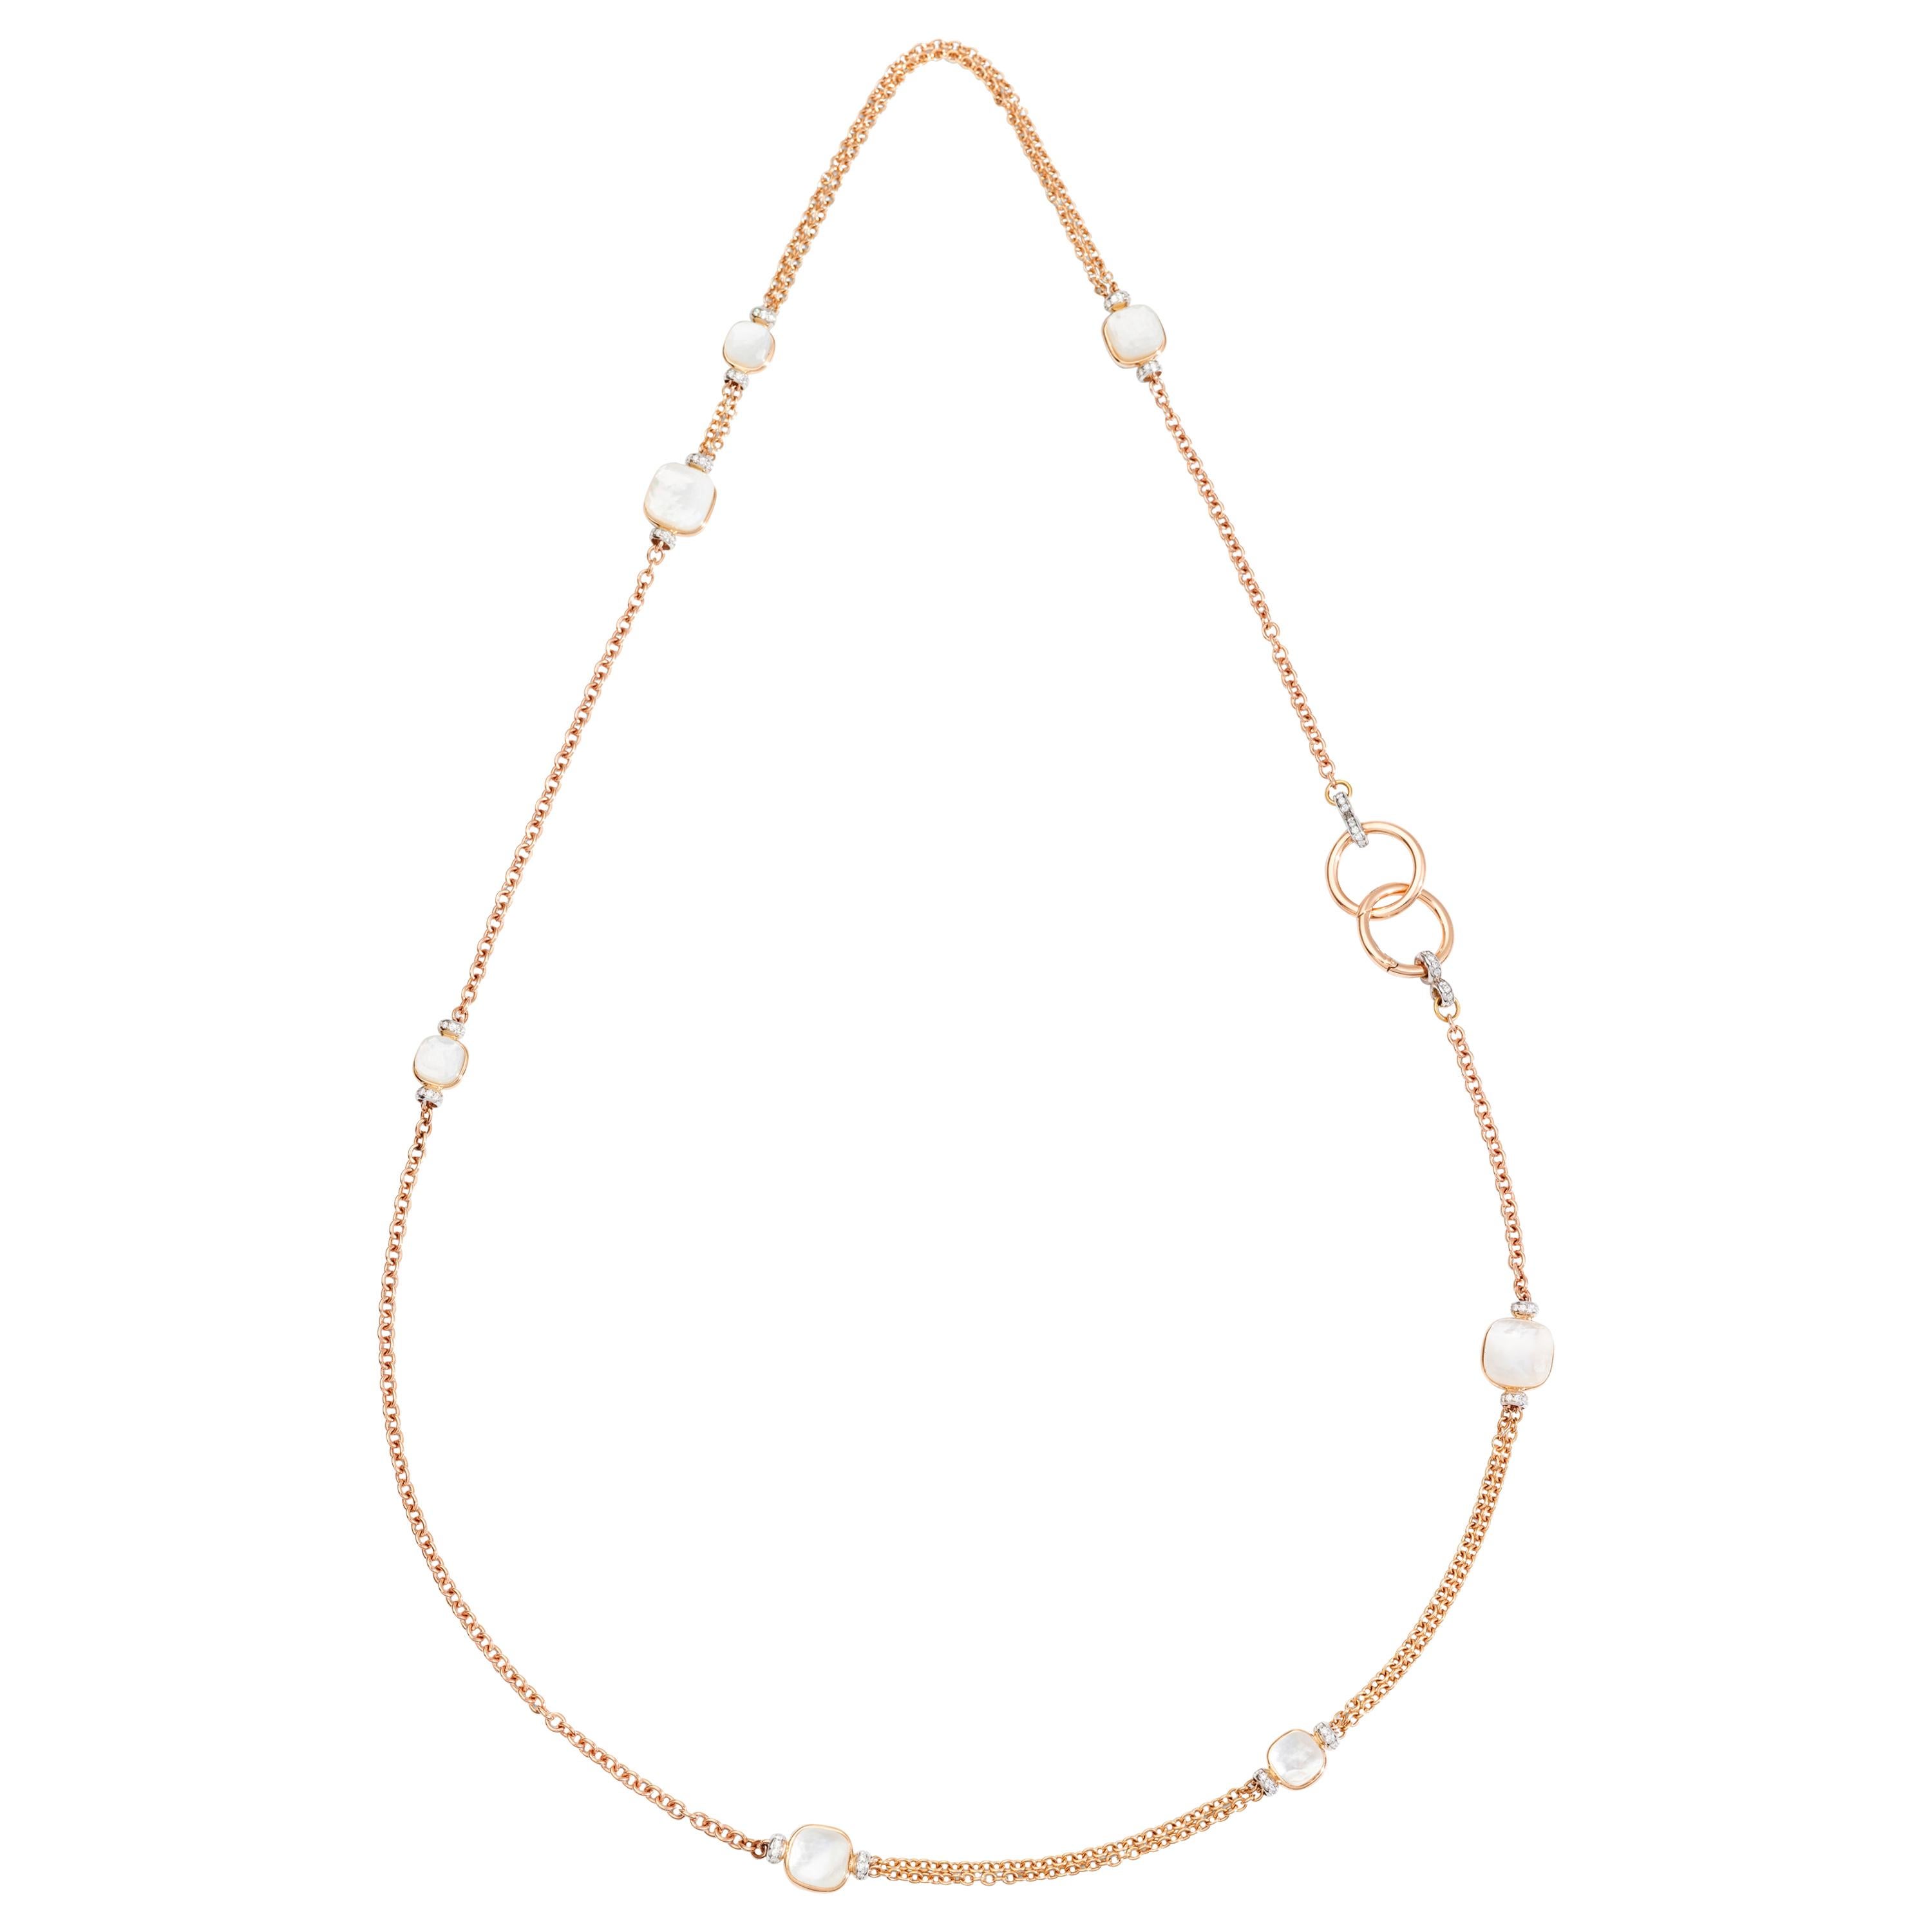 Pomellato Nudo 18 Karat Rose Gold and Mother of Pearl Necklace